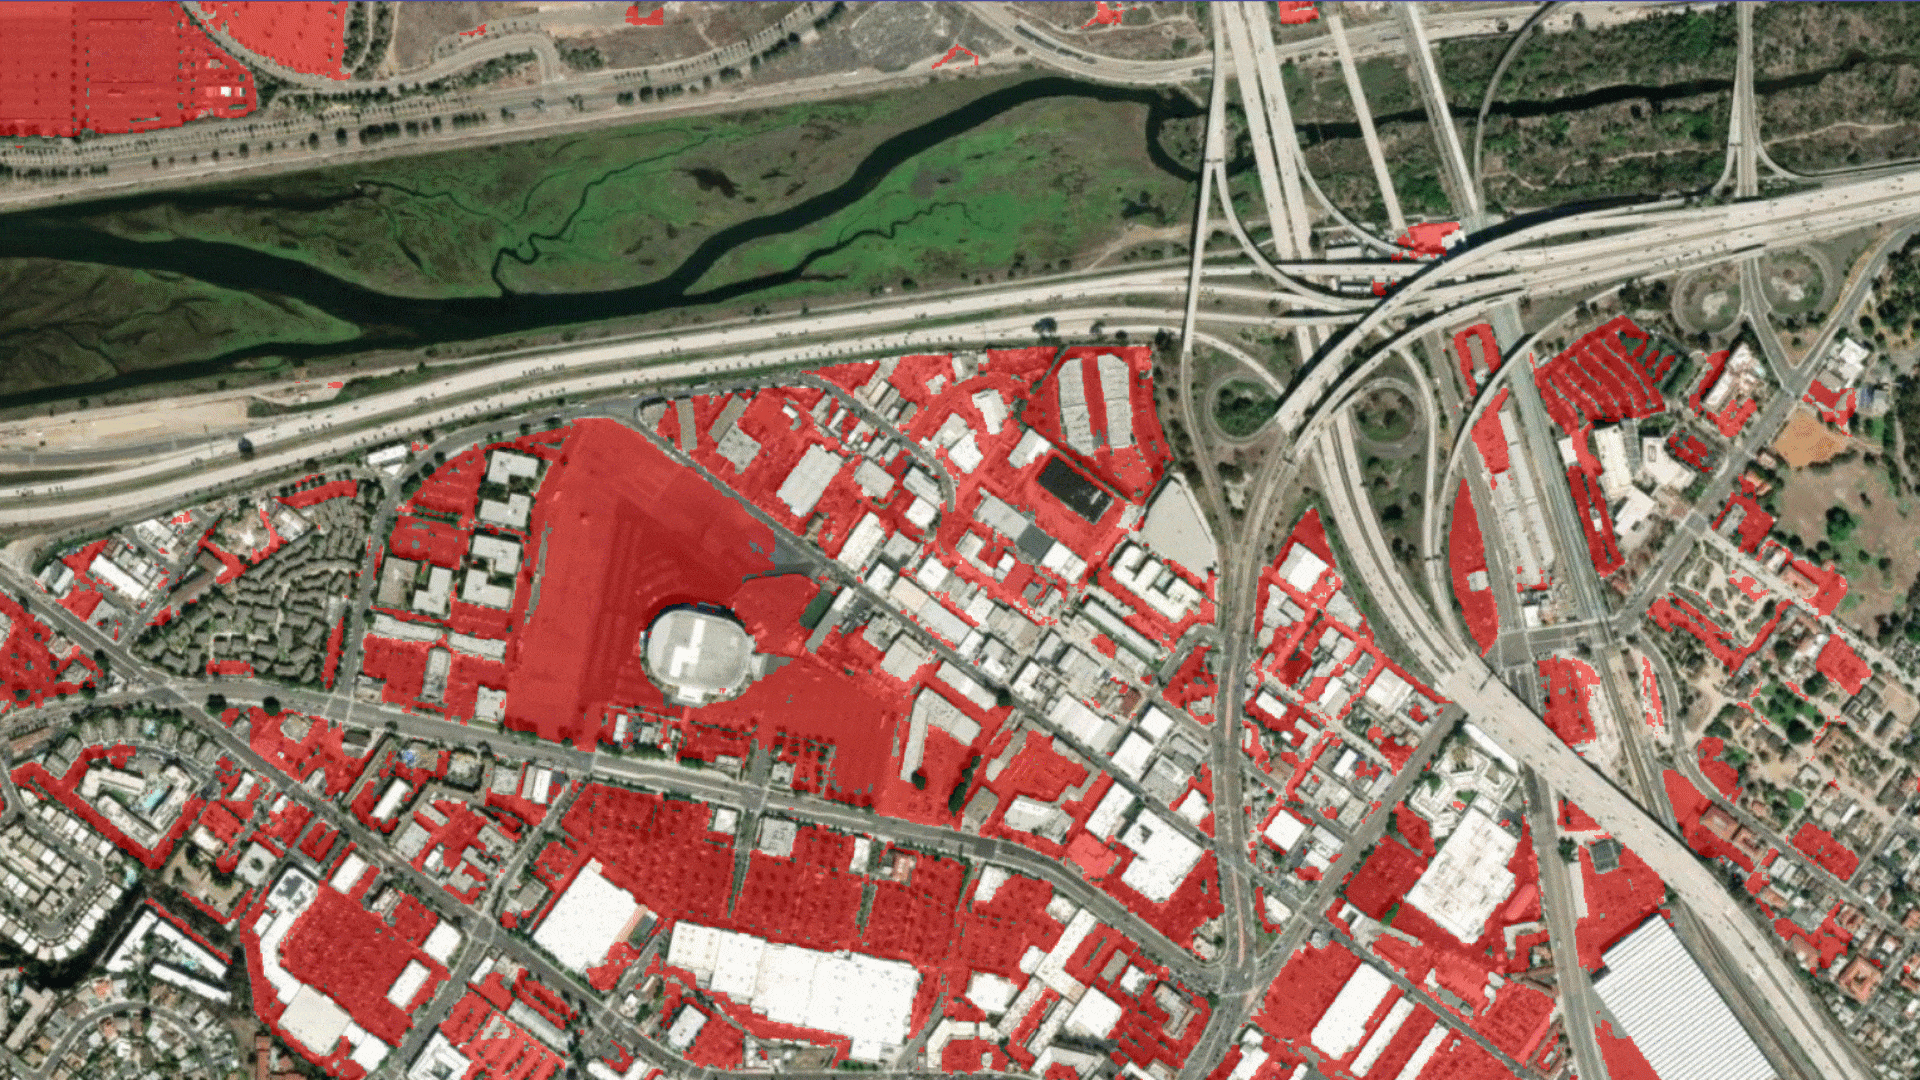 Parking Lot Classification using High Resolution Imagery